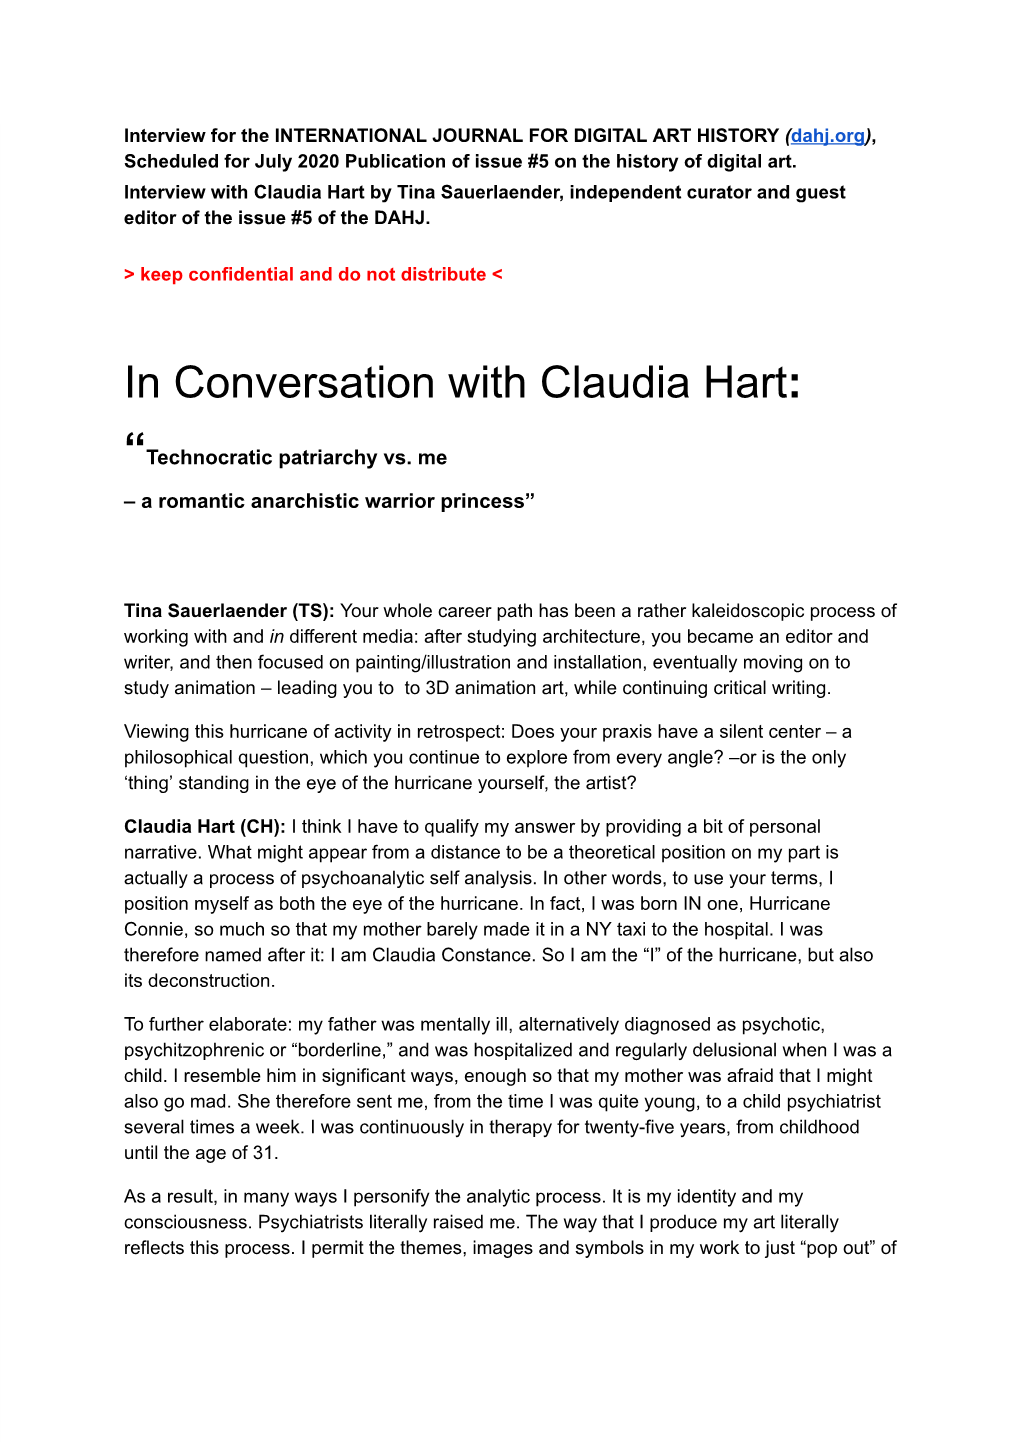 In Conversation with Claudia Hart